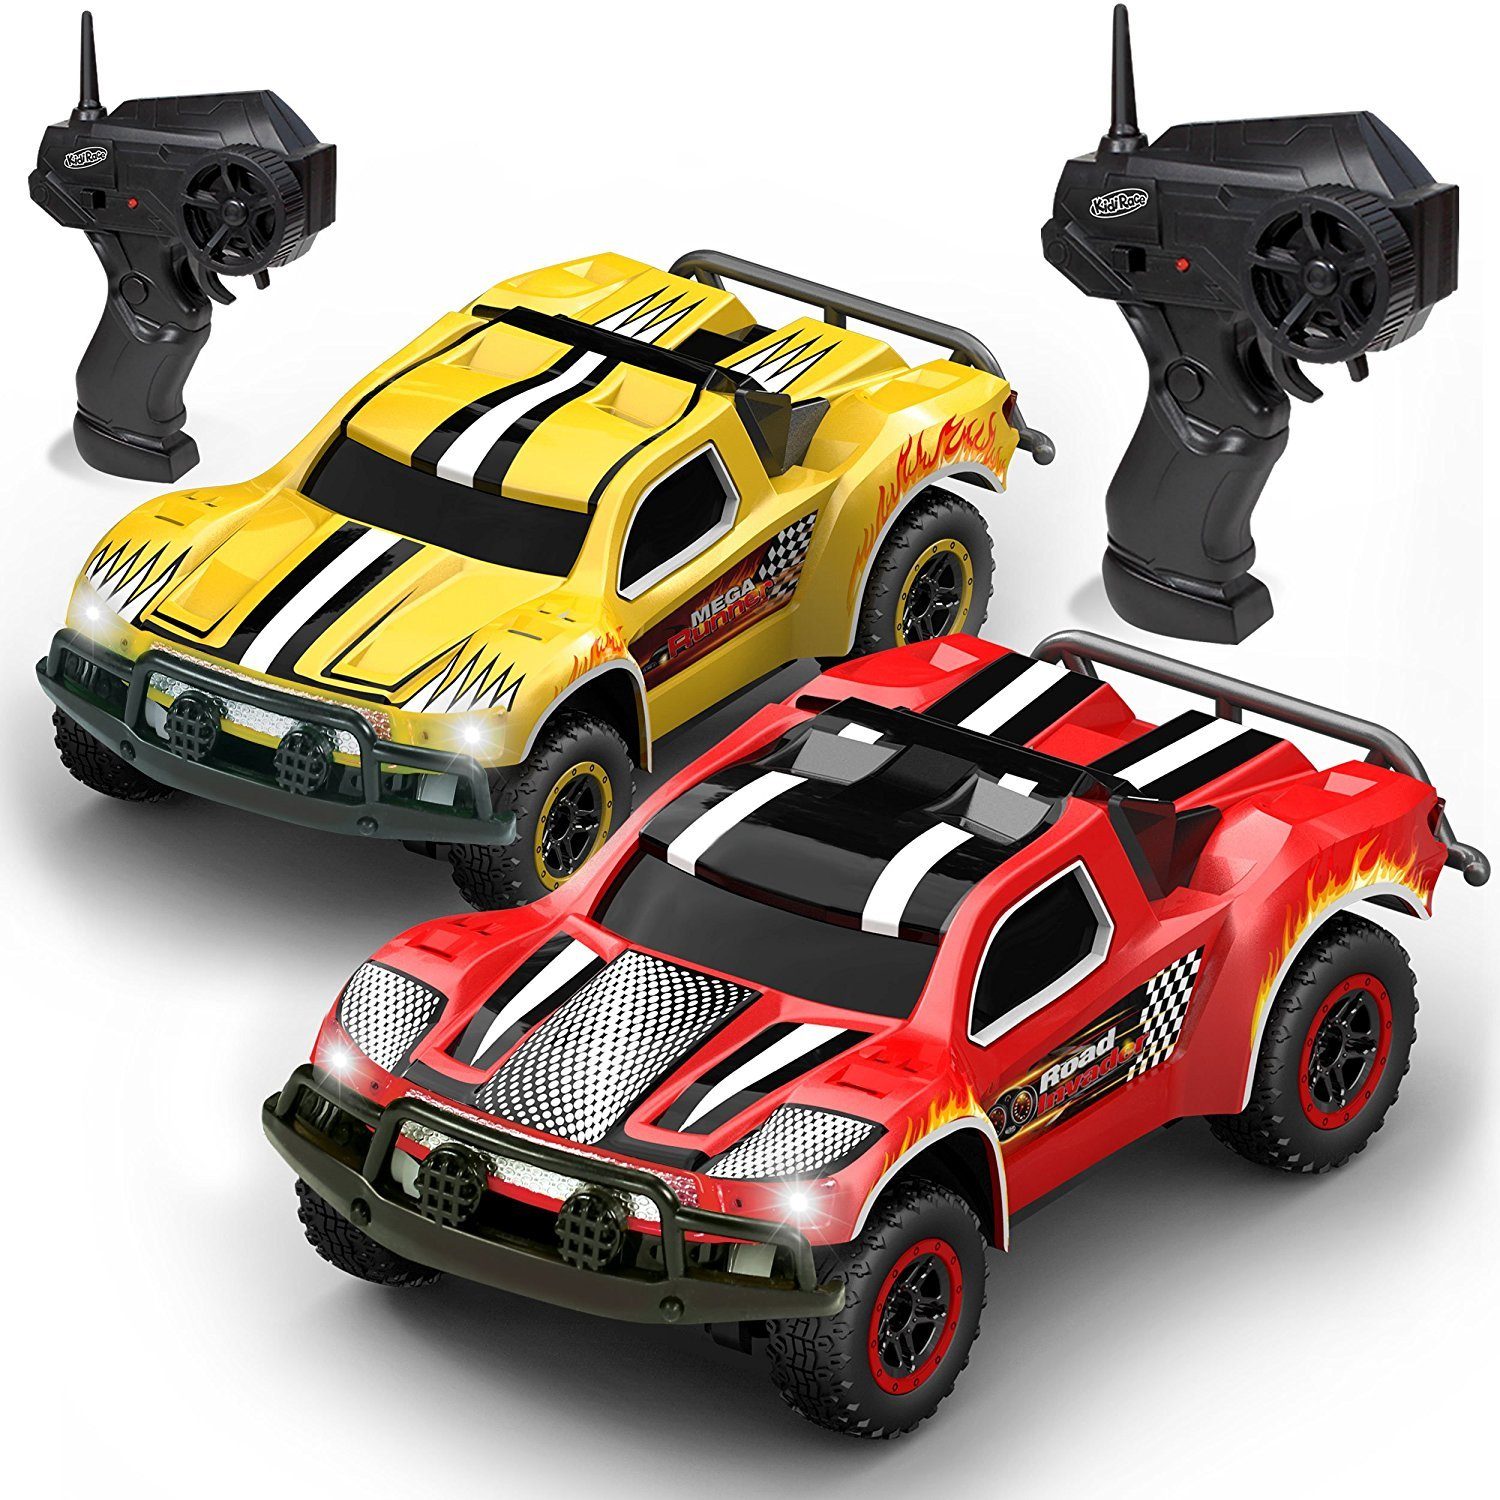 The 10 Best Remote Control Cars in 2019 (Guide and Reviews)